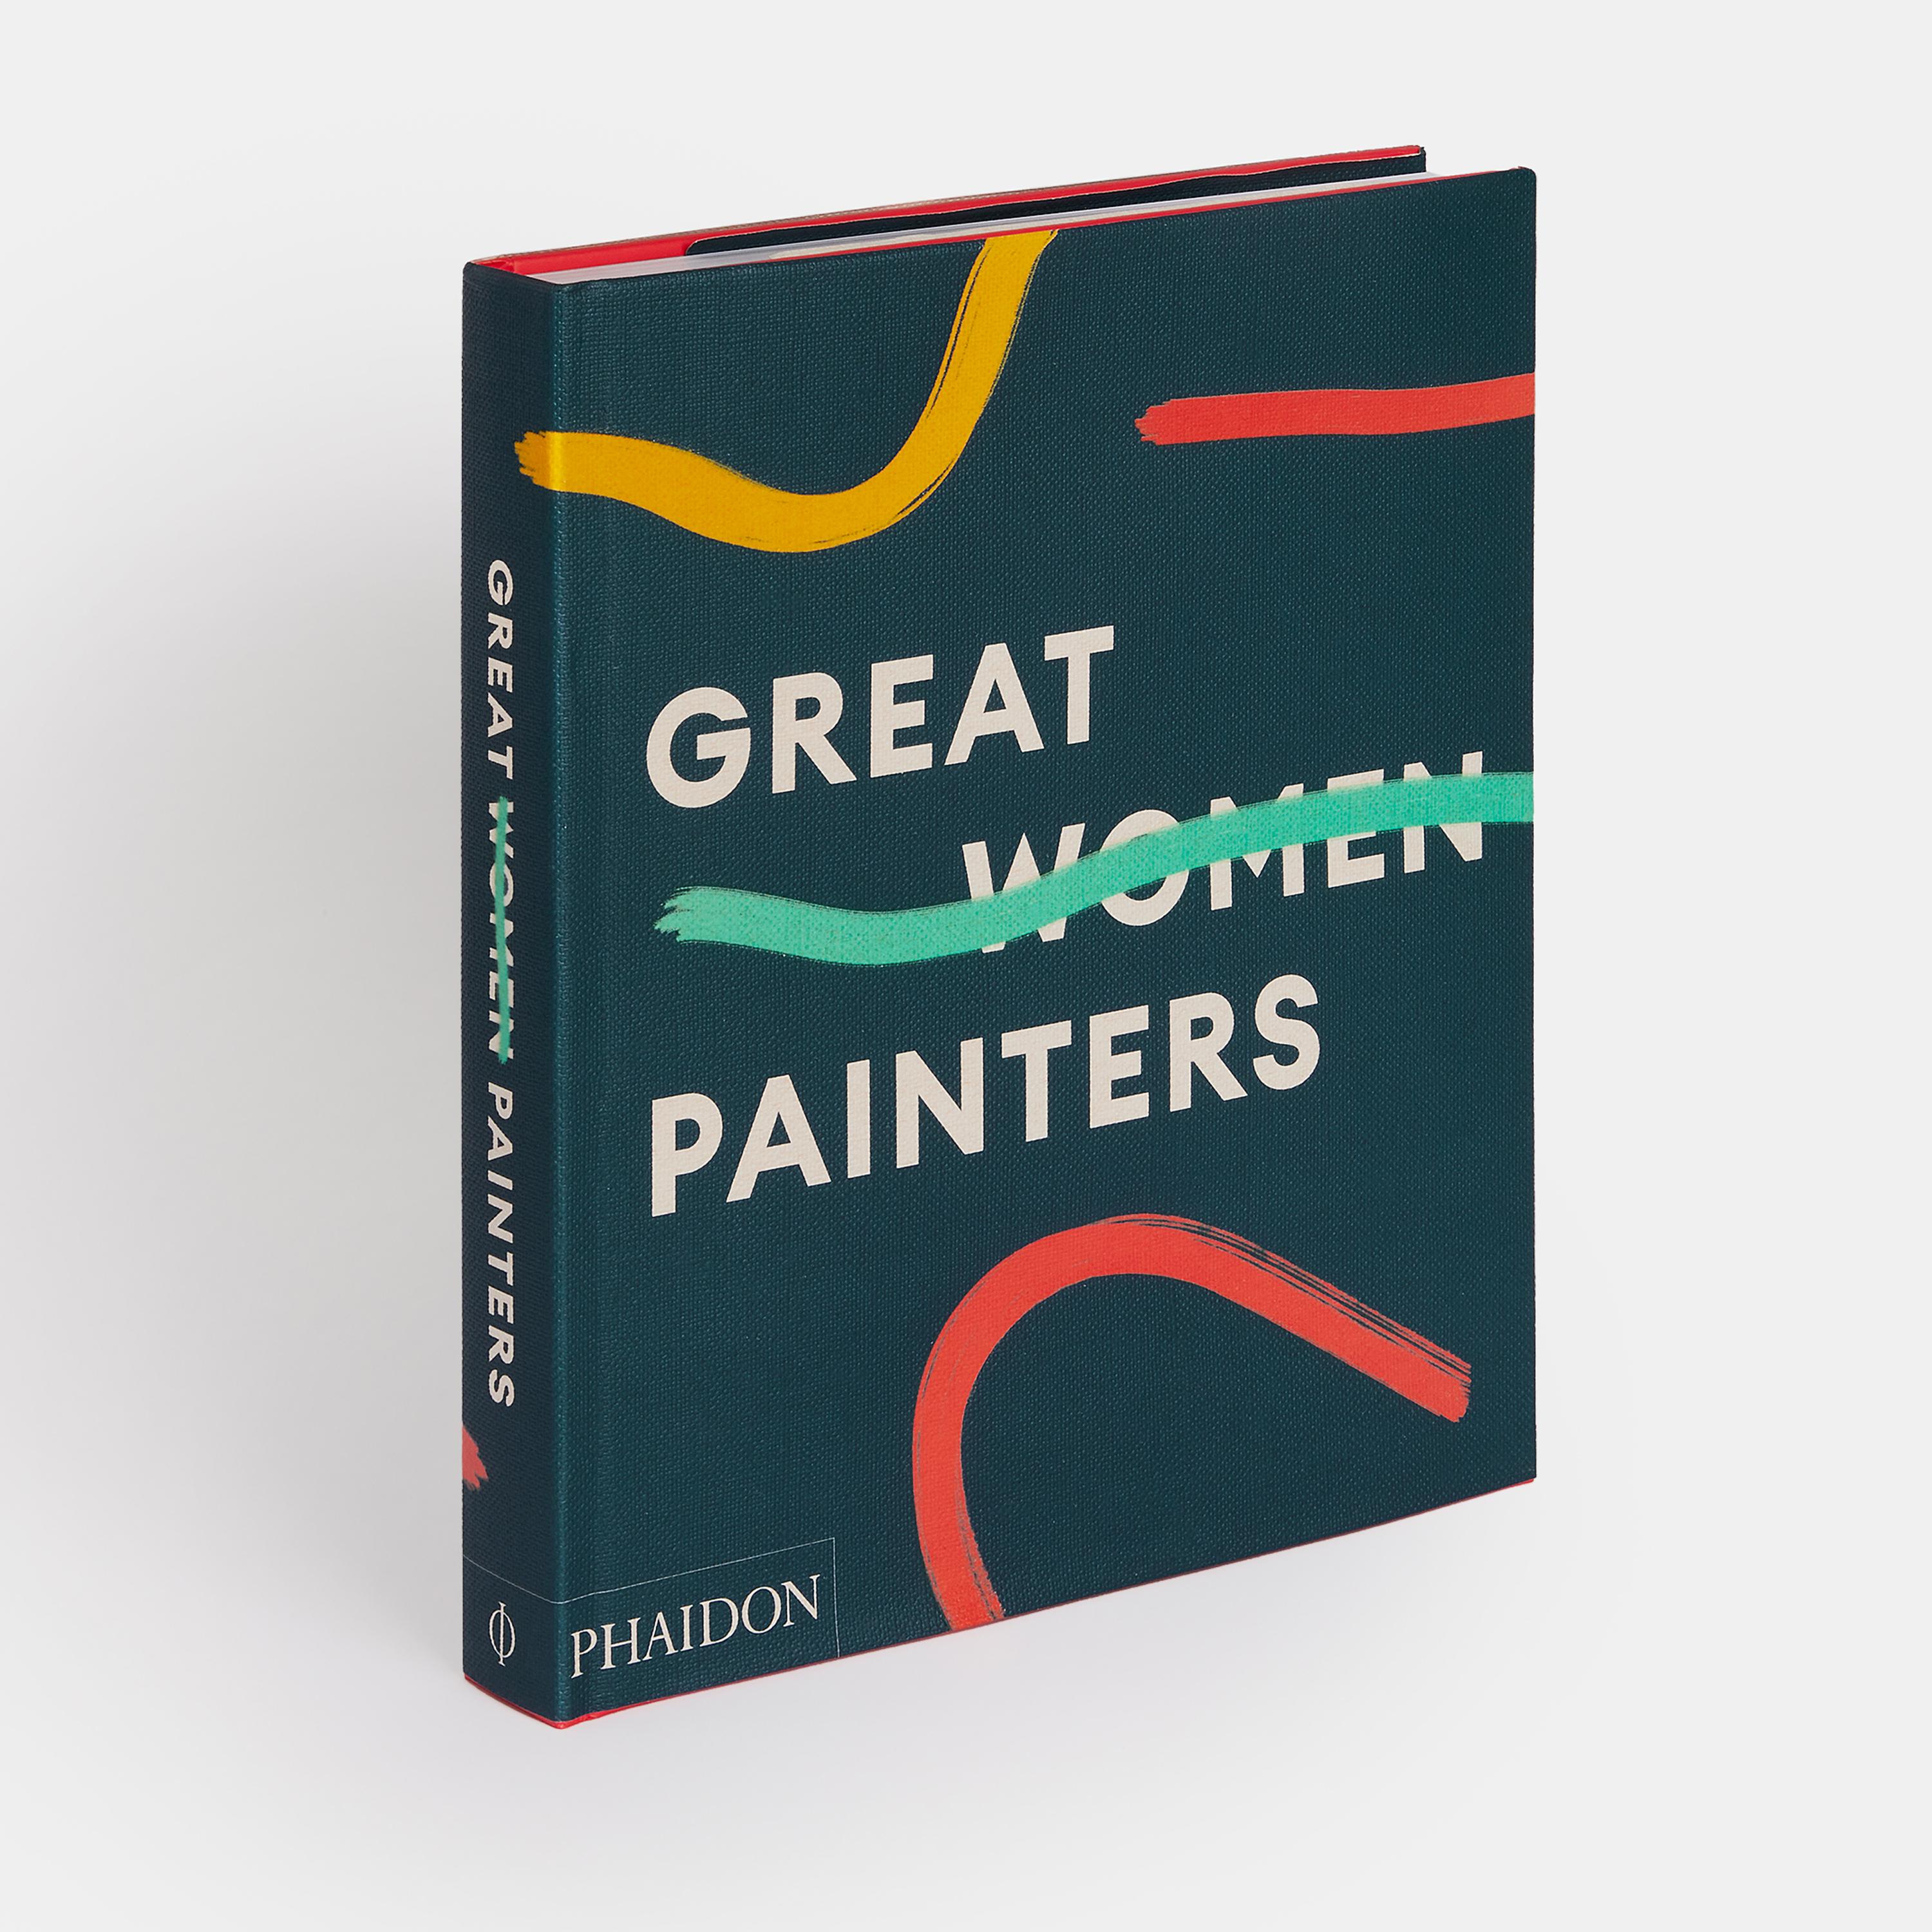 A sumptuous survey of over 300 women painters and their work spanning almost five centuries

Great Women Painters is a groundbreaking book that reveals a richer and more varied telling of the story of painting. Featuring more than 300 artists from